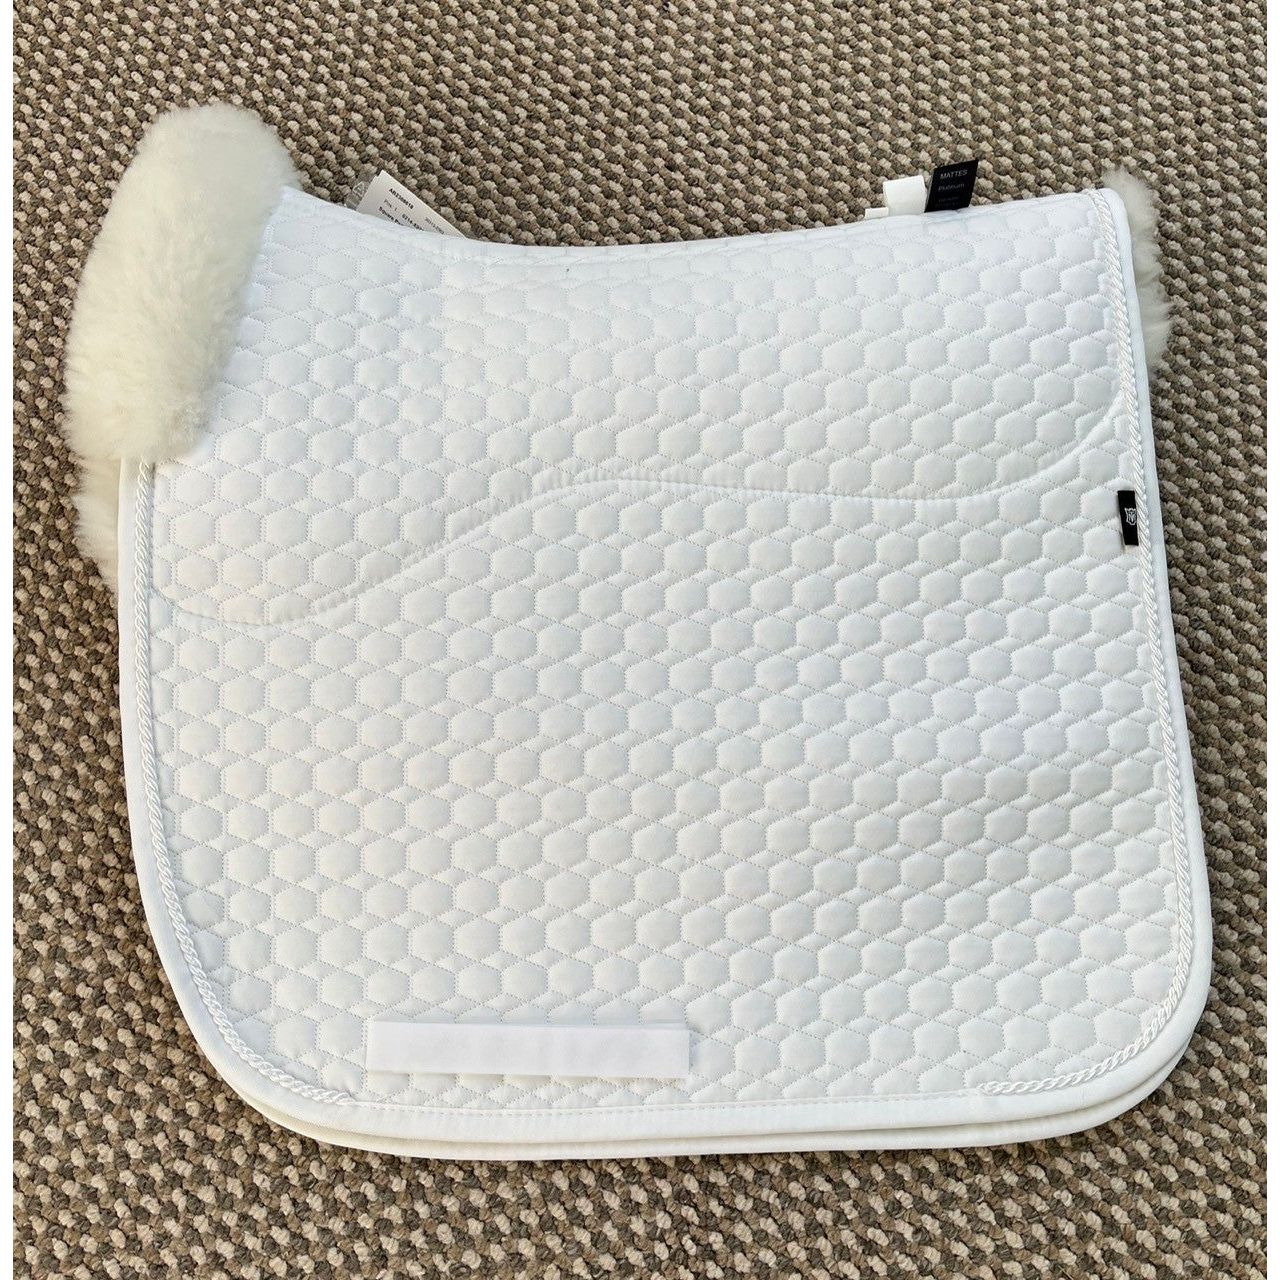 Mattes Semi-Lined Saddlepad with front trim - in stock and ready to wear!